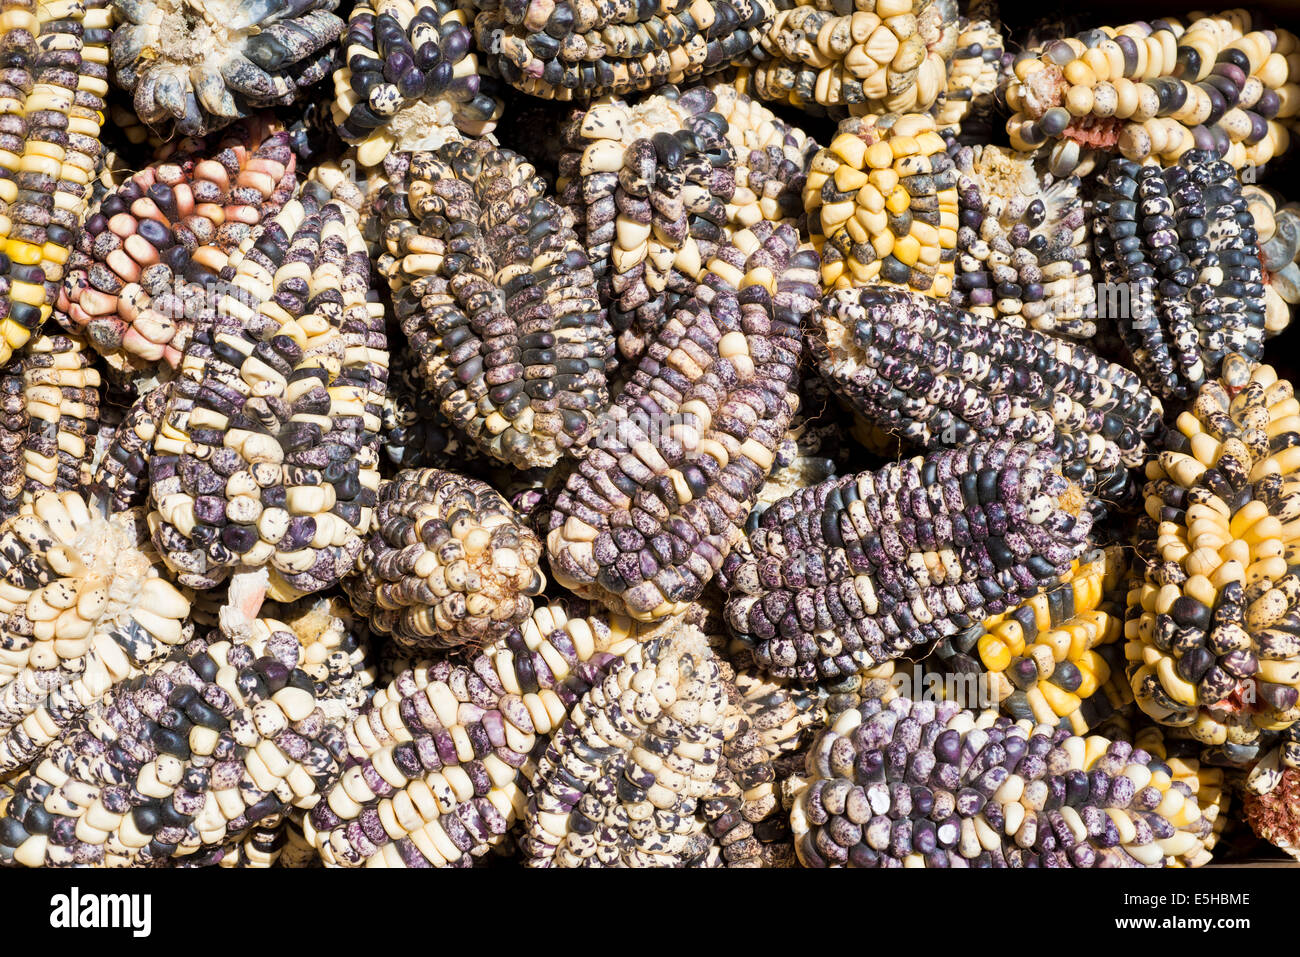 Colorful corn cobs laid out to dry, Peru Stock Photo